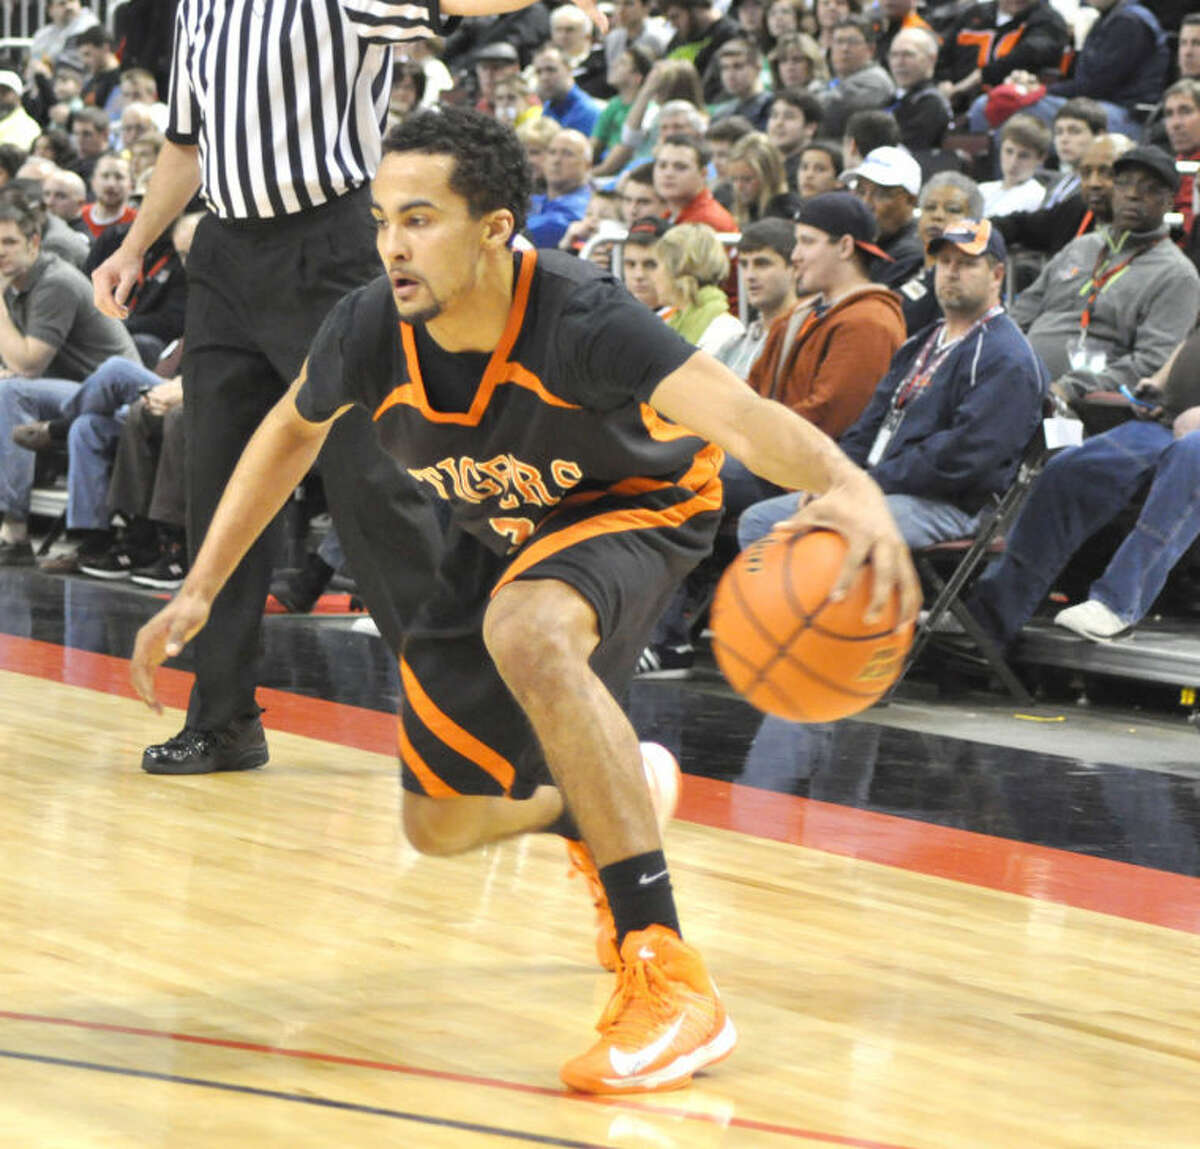 Tre Harris looks for an opening from the perimeter at the 2012-13 Class 4A state tournament.